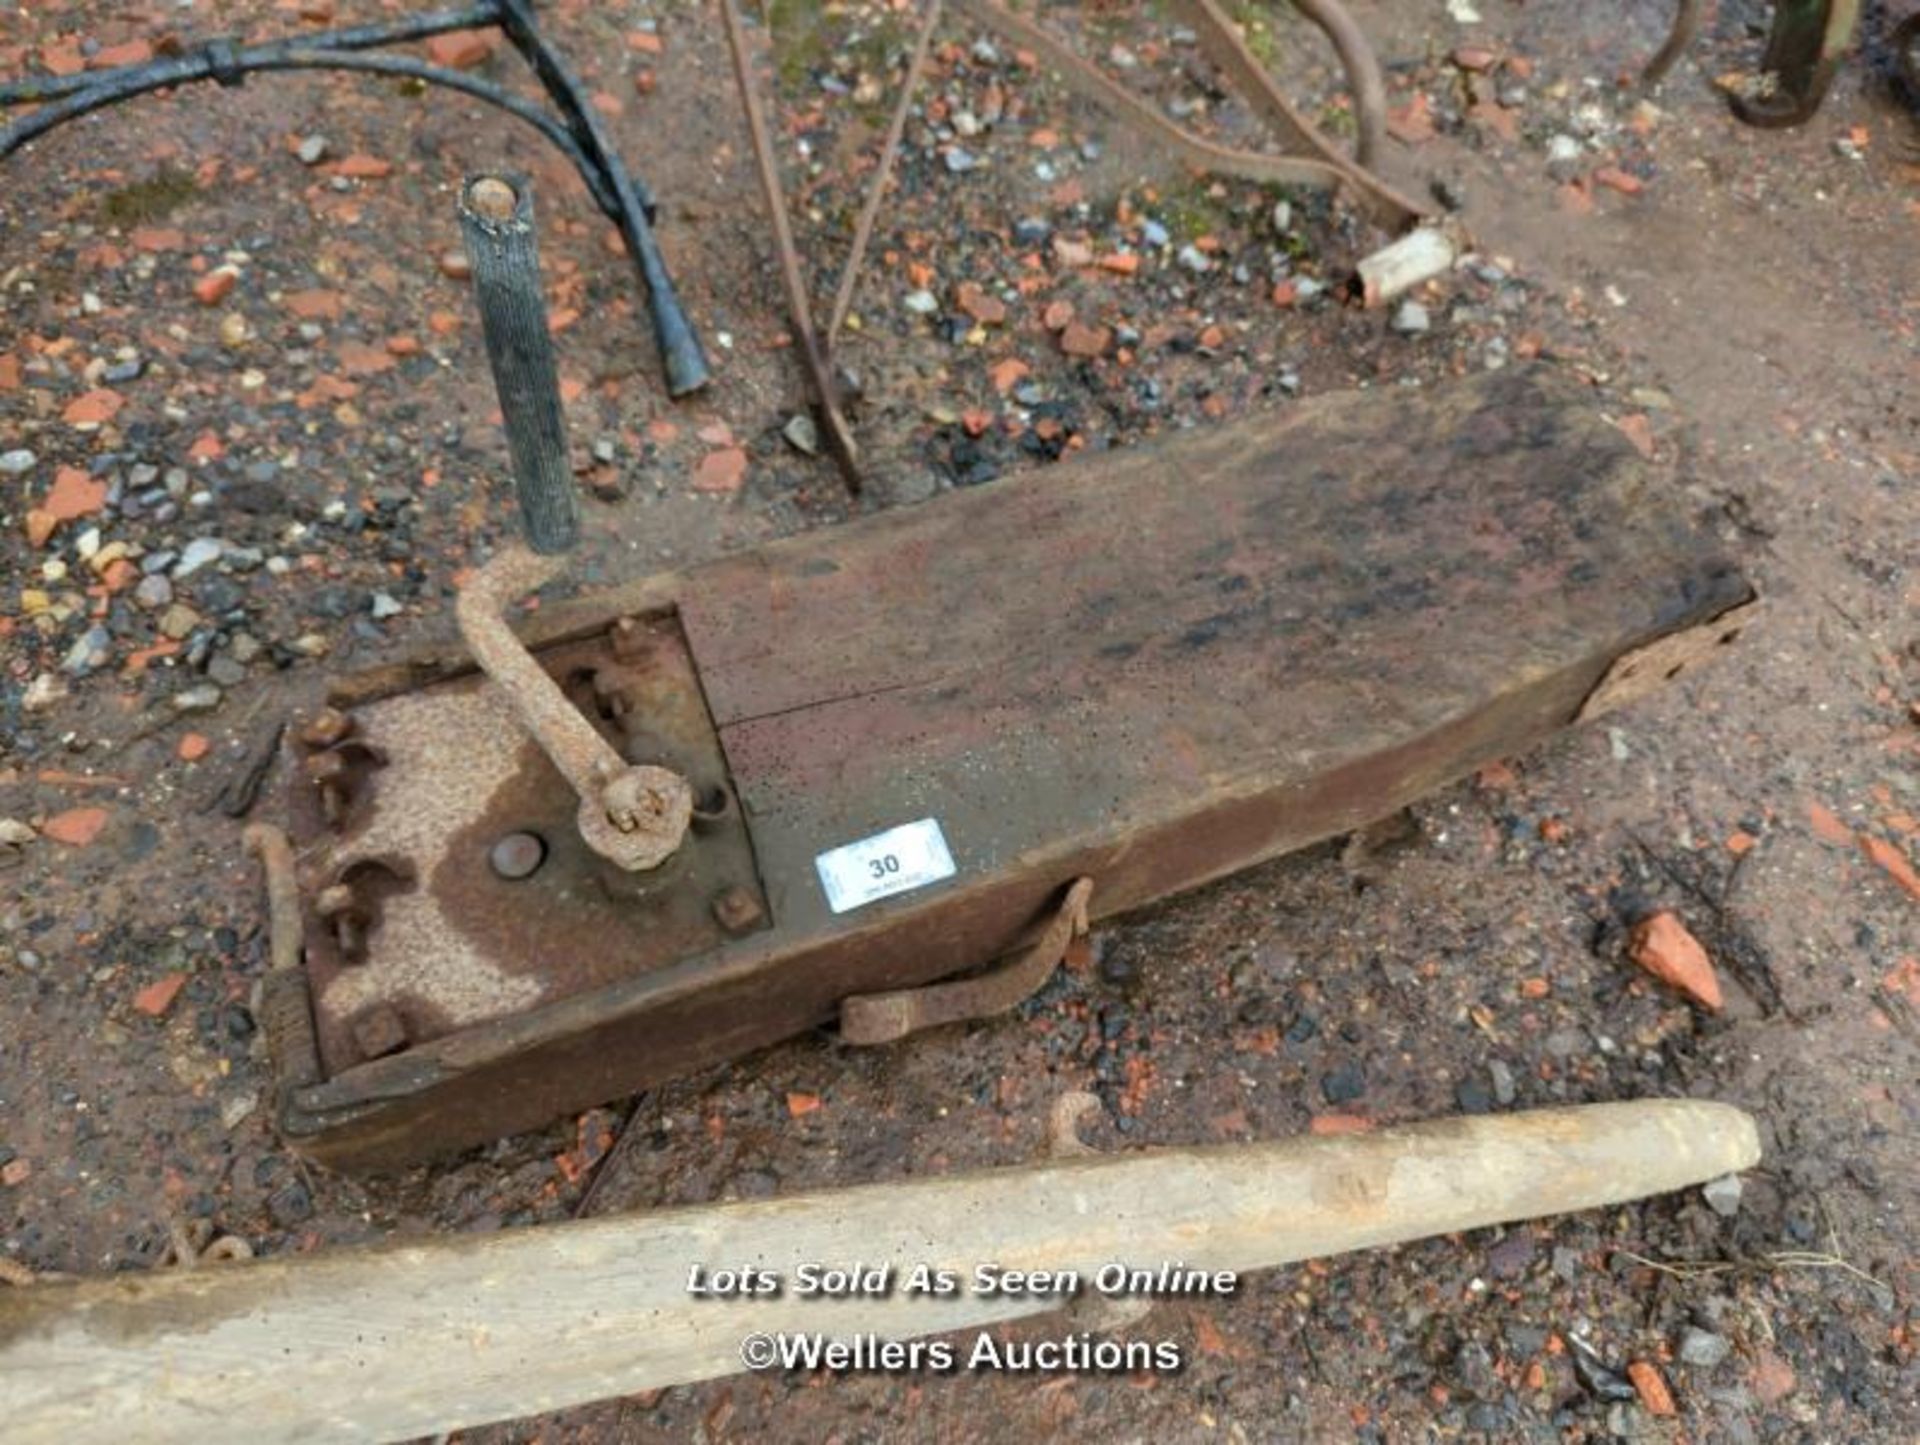 *CART JACK / ALL LOTS ARE LOCATED AT AUTHENTIC RECLAMATION TN5 7EF